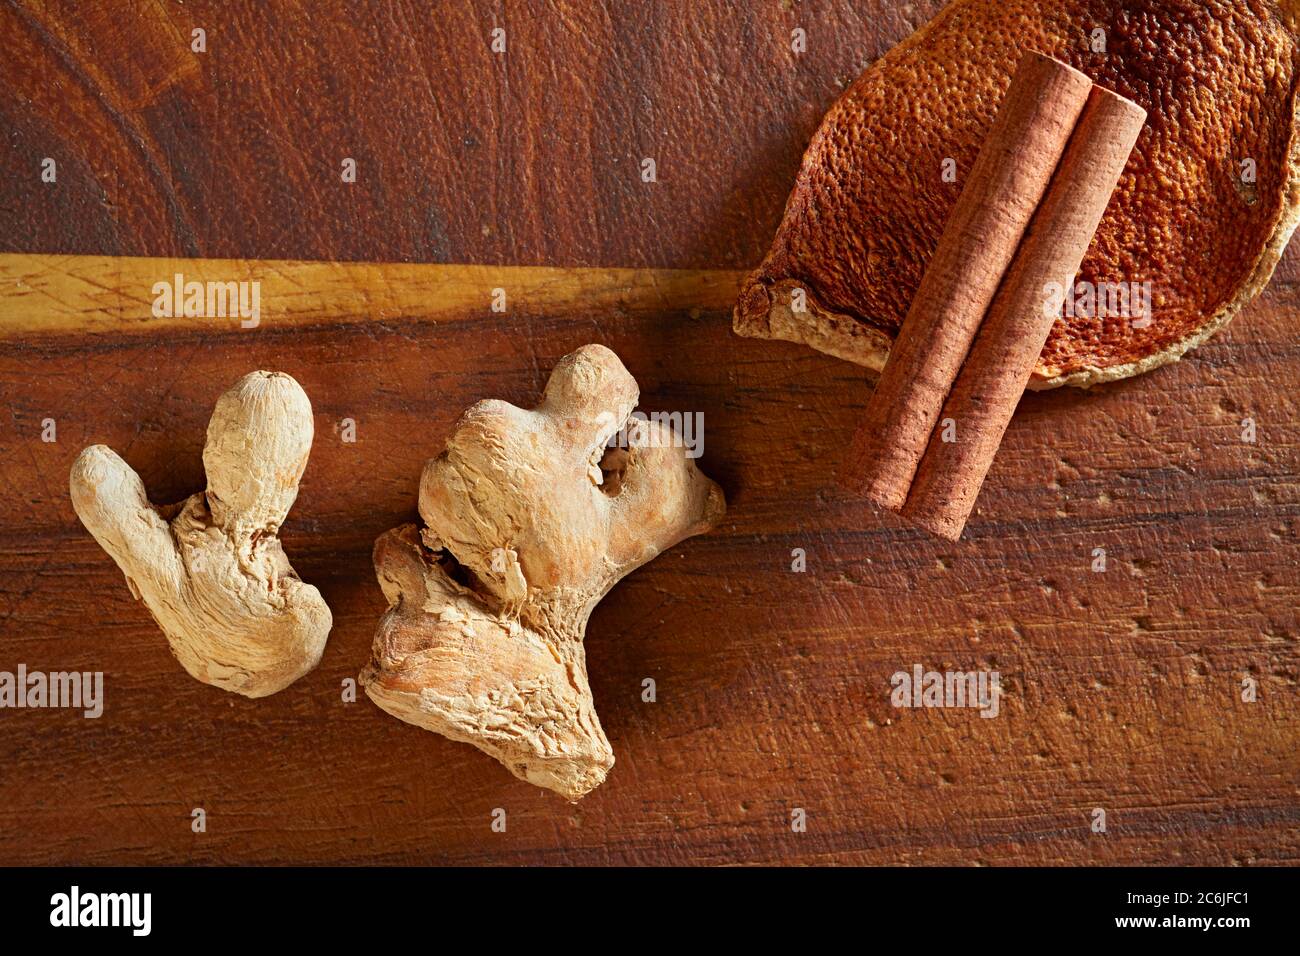 Dry mulling spices (ginger, orange rind, cinnamon stick) on wooden board. Stock Photo